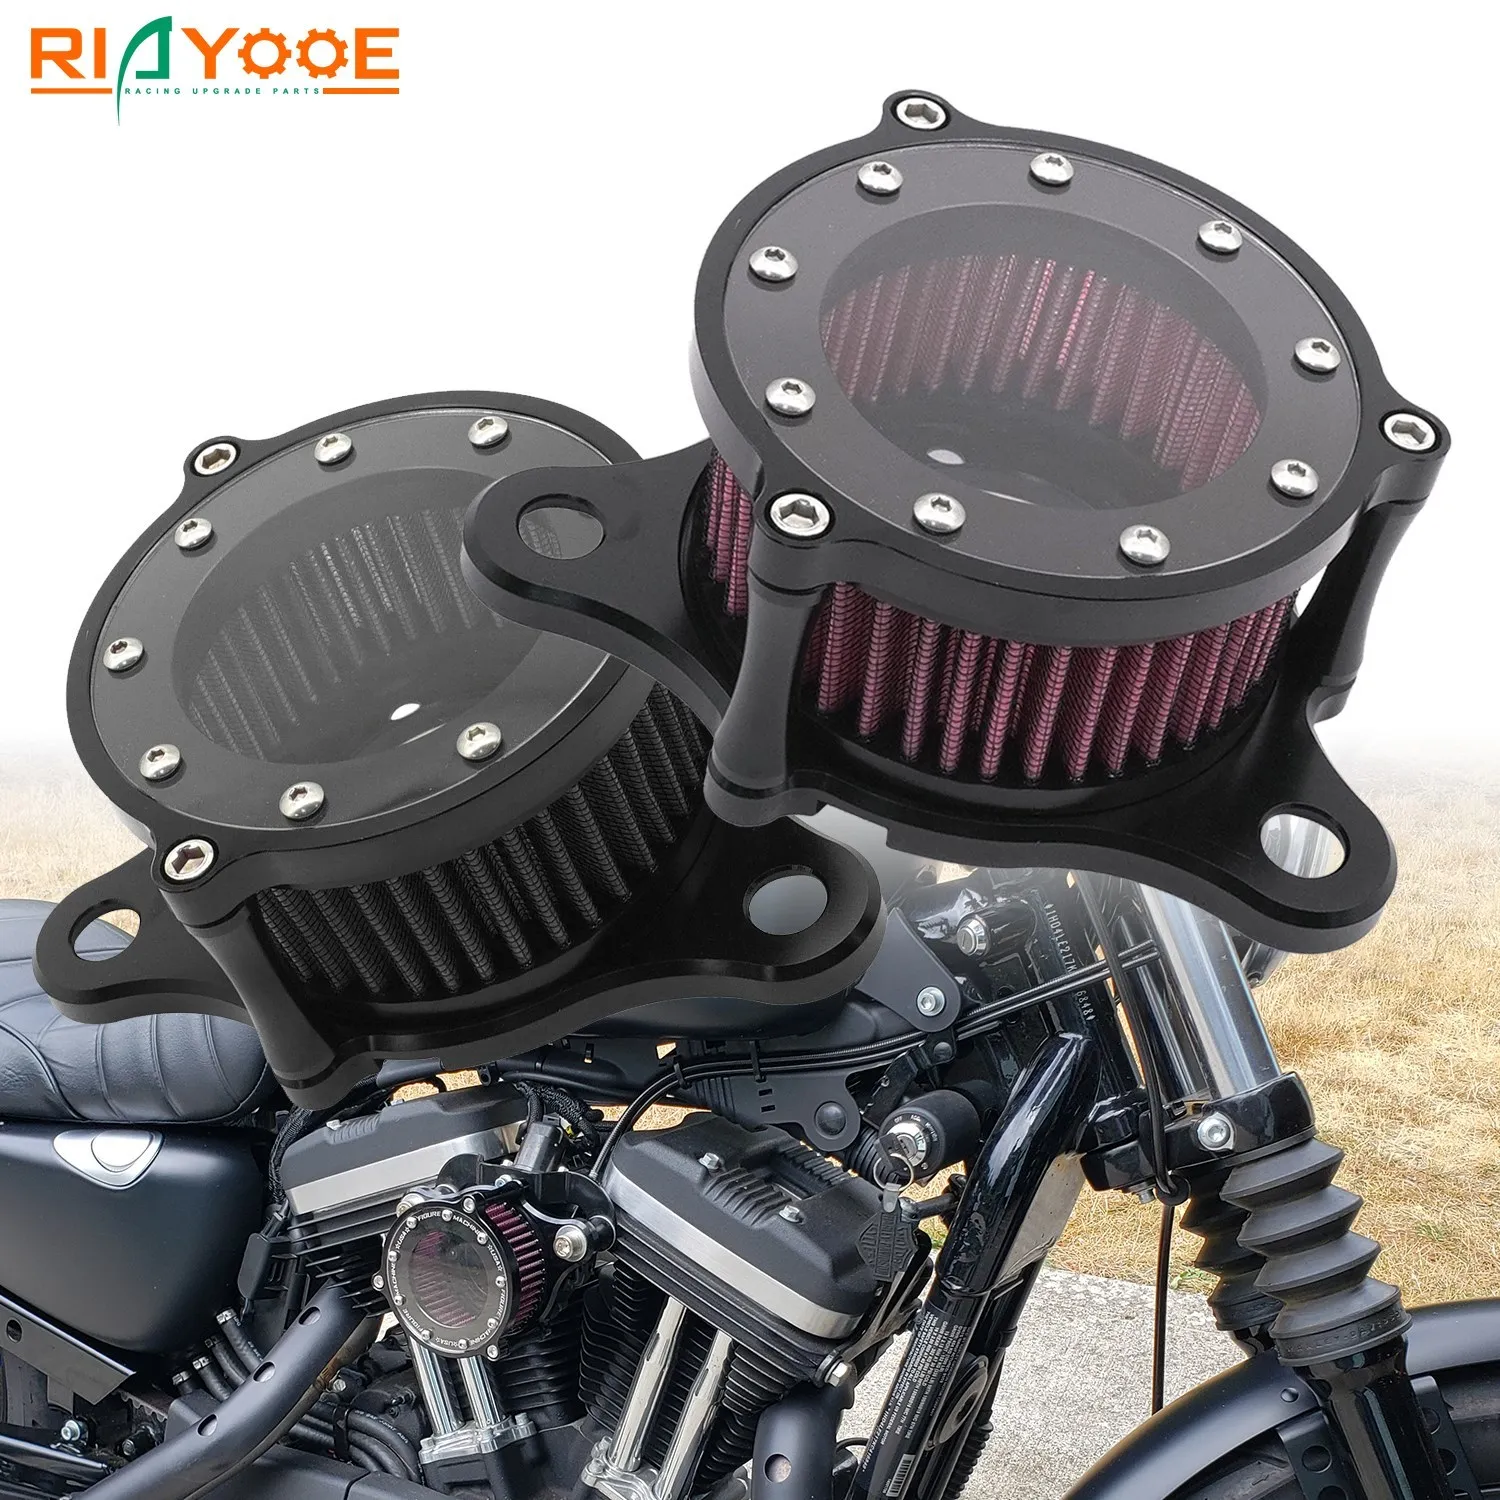 

High Flow Air Filter Motorcycle Accesorios for Harley Davidson 883 Sportster 1200 Sport CNC Plate Air Intake Filter System Kit